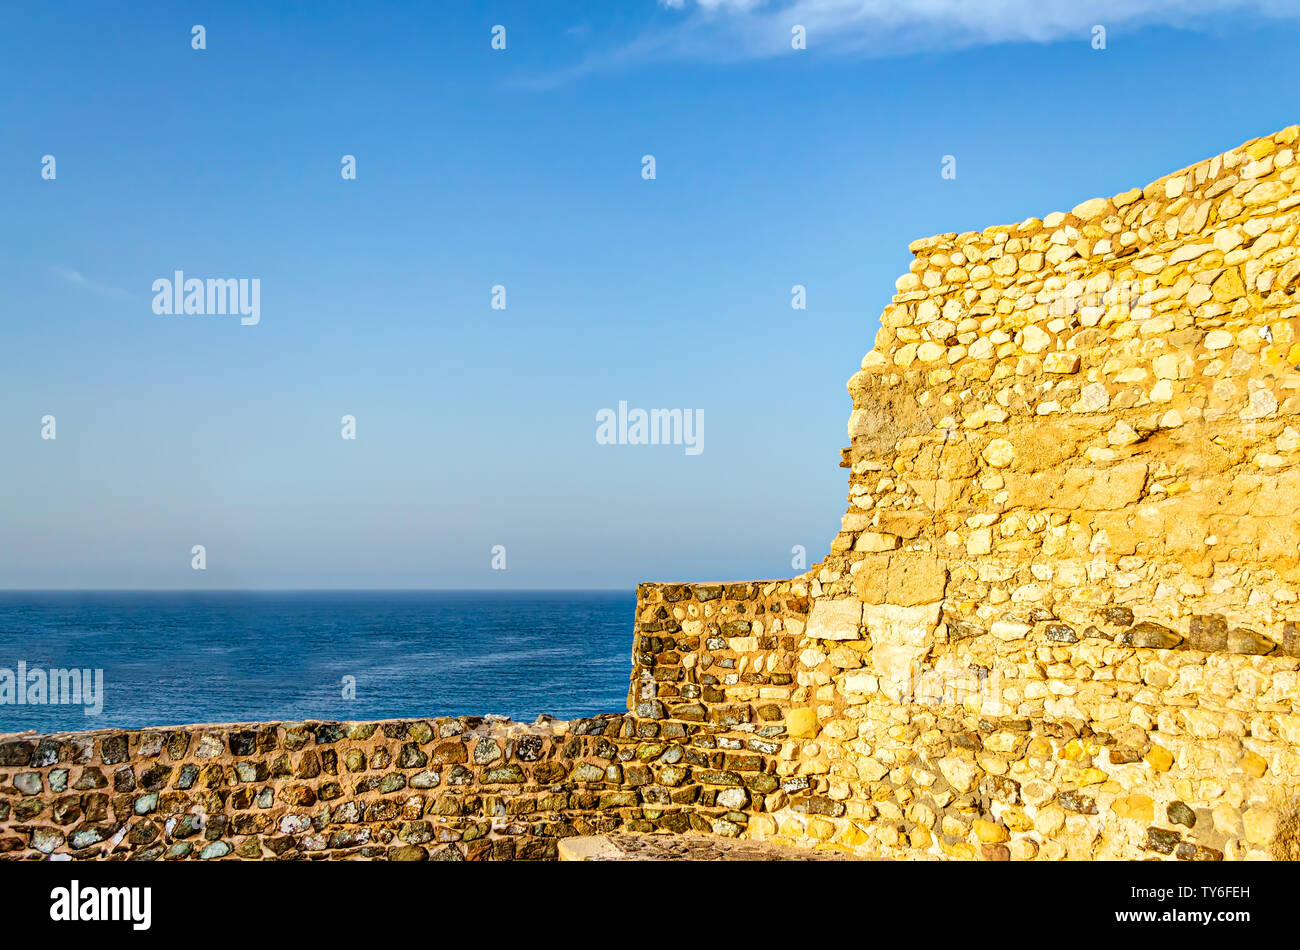 Old, abandoned and ruined fort wall opening to the blue sea with clear sky. From Muttrah, Muscat, Oman. Stock Photo